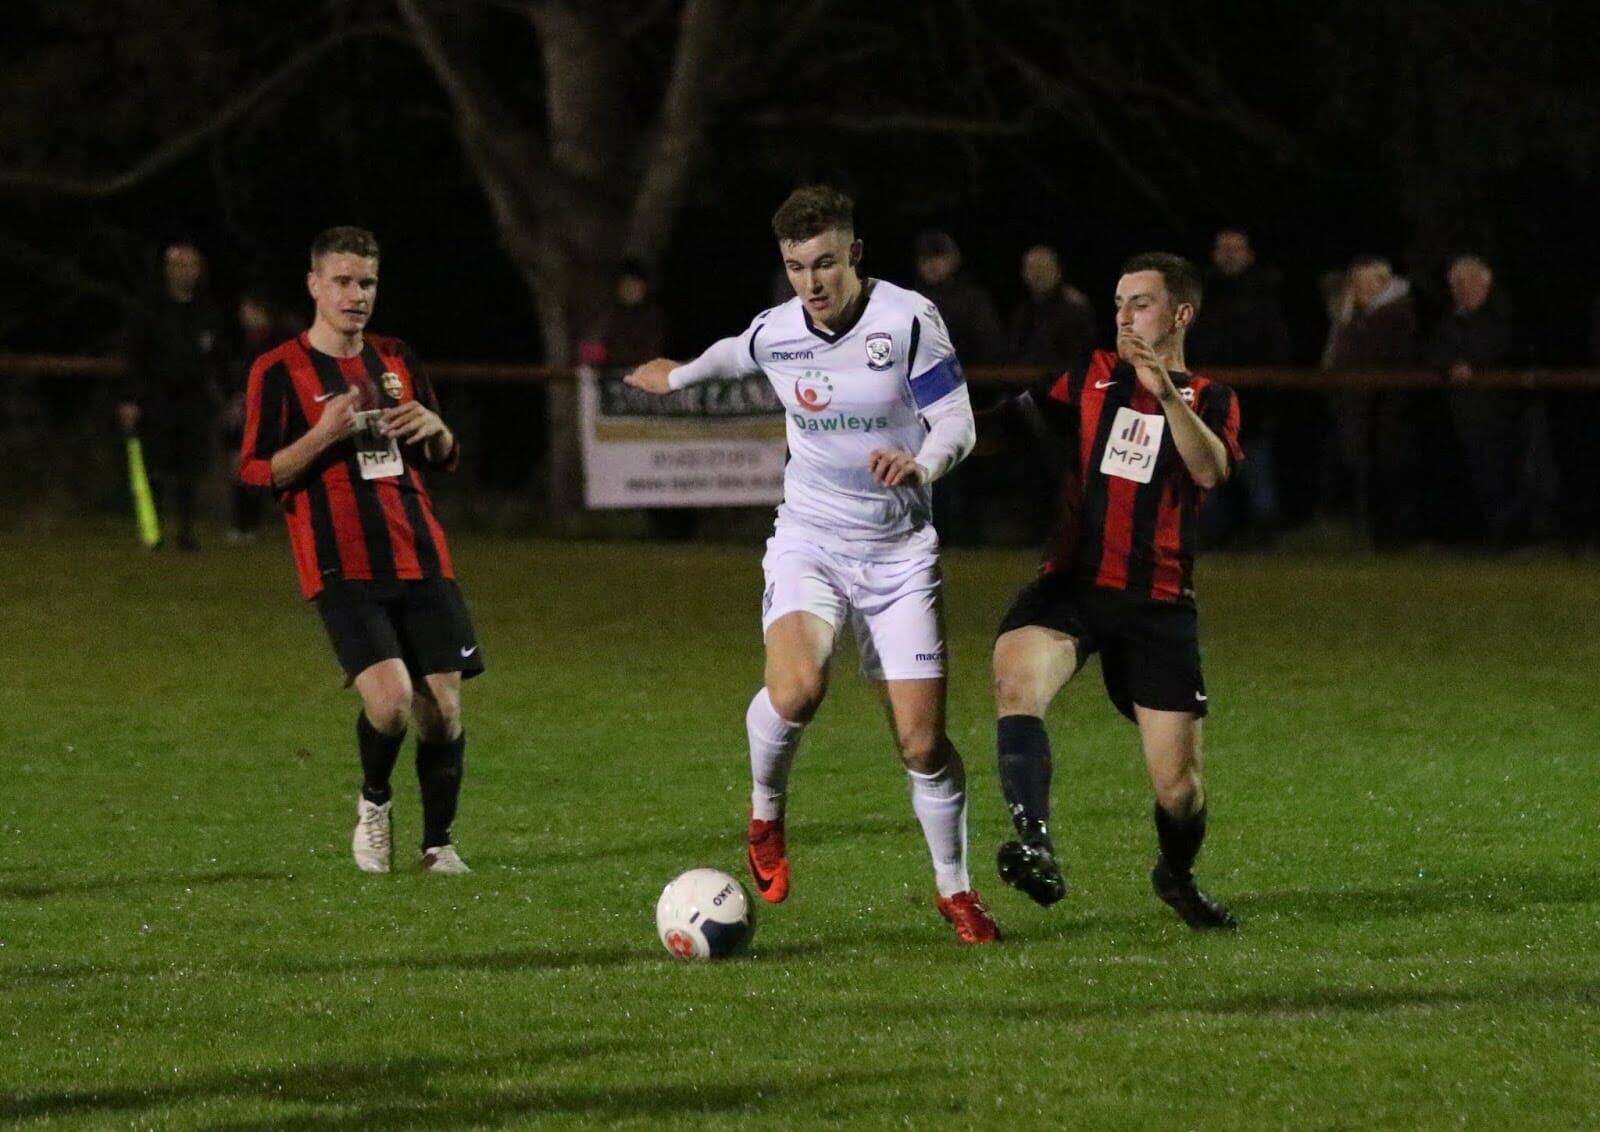 GALLERY | Hinton FC 0-13 Hereford FC